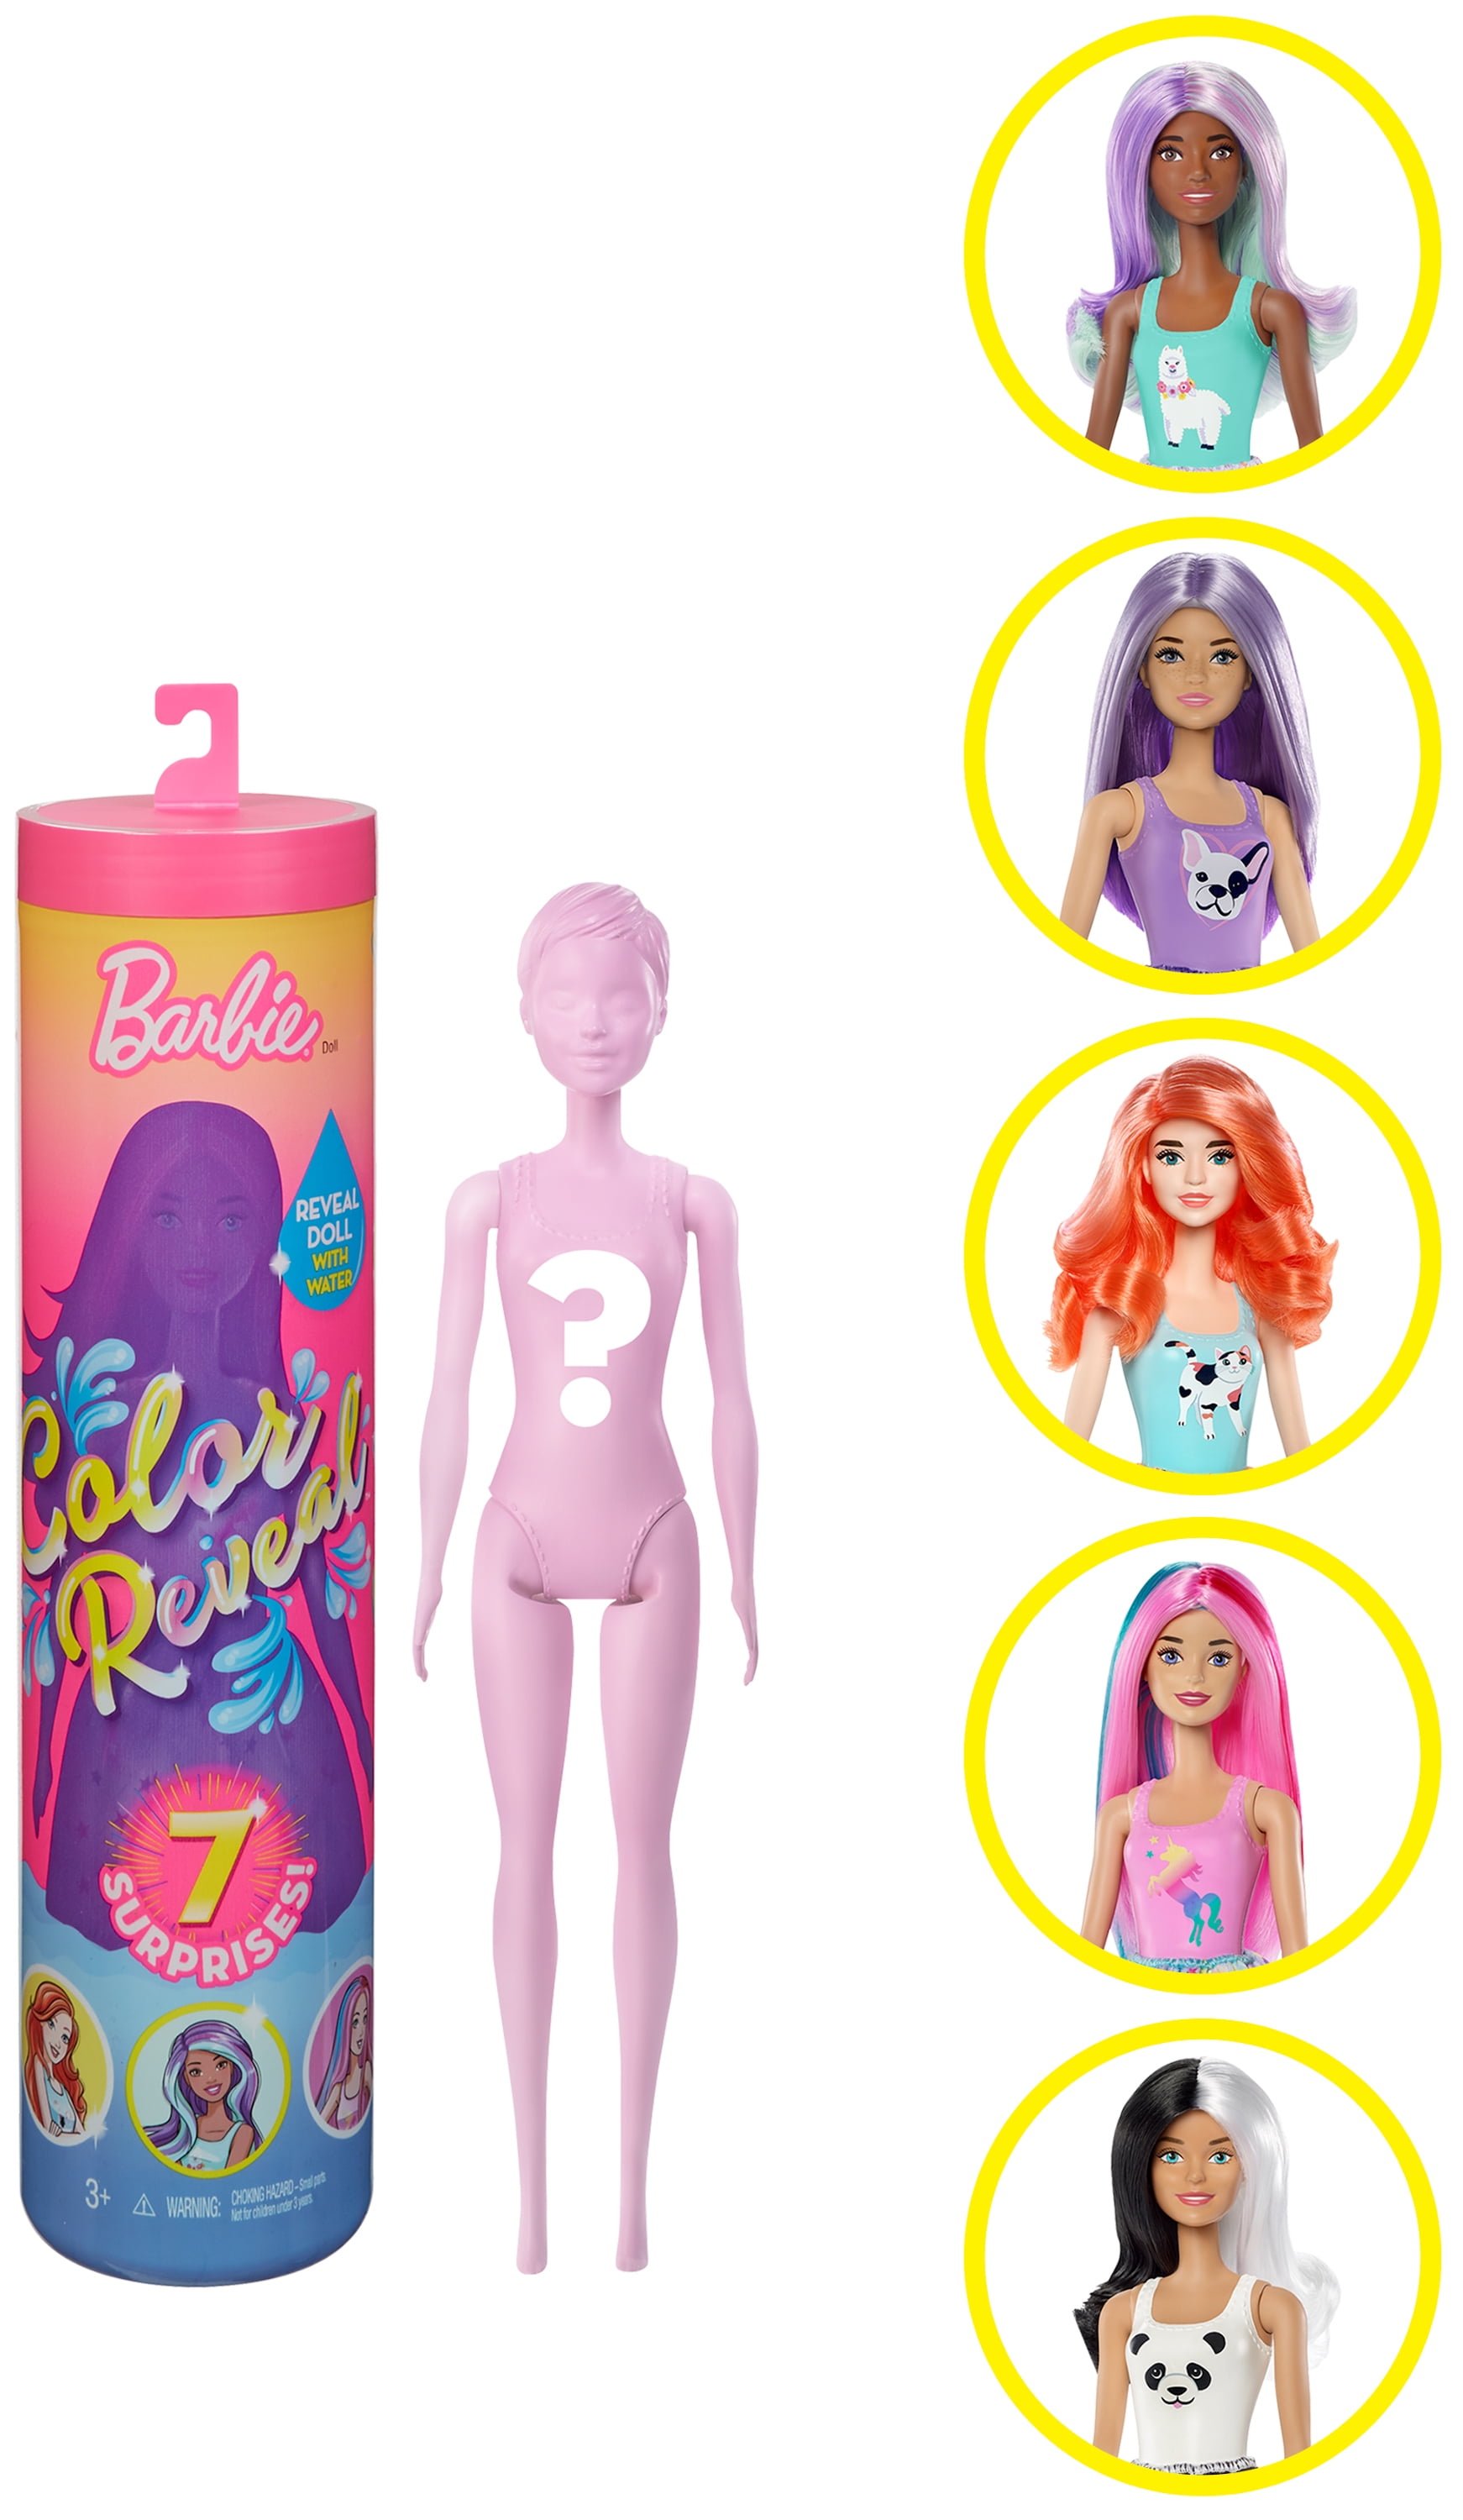 Barbie Color Reveal Doll 12 inch Tall 7 Surprises Sunny N Cool Series